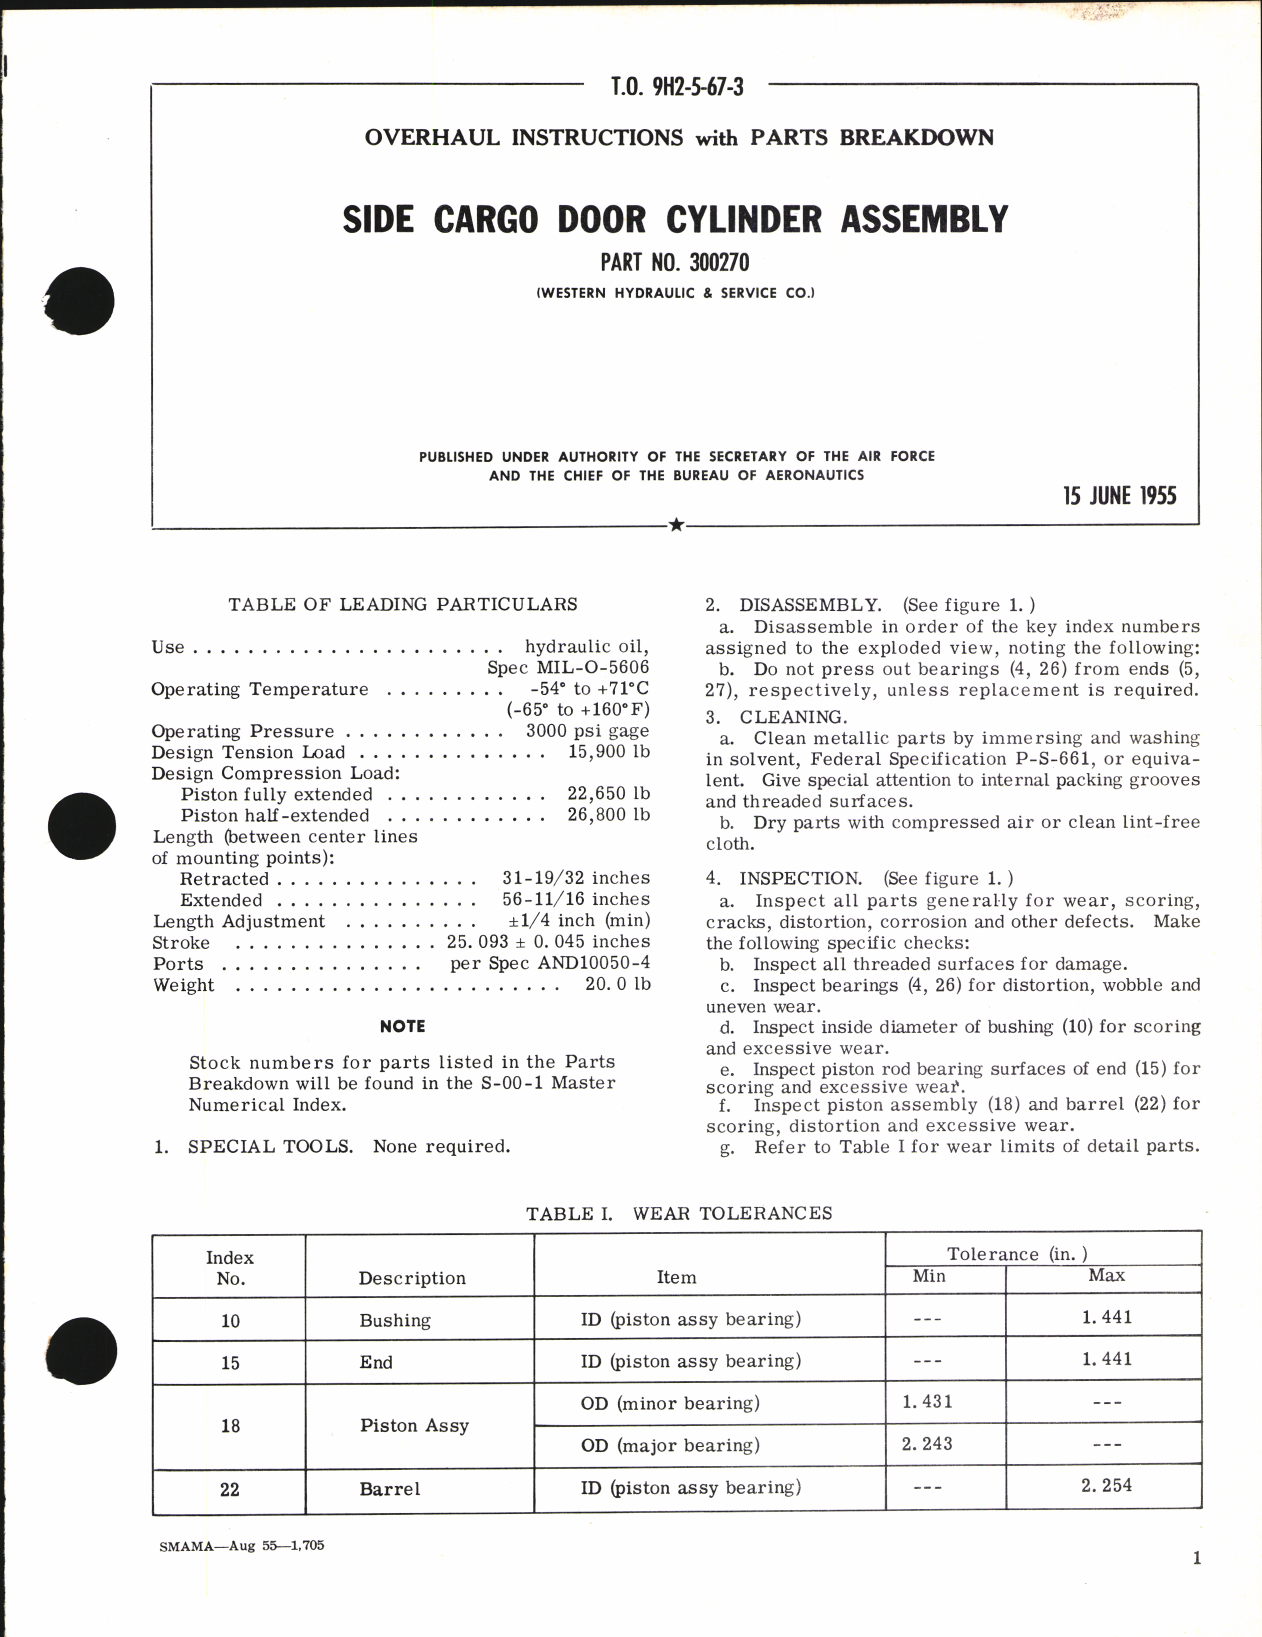 Sample page 1 from AirCorps Library document: Overhaul Instructions with Parts Breakdown for Side Cargo Door Cylinder Assembly Part No. 300270